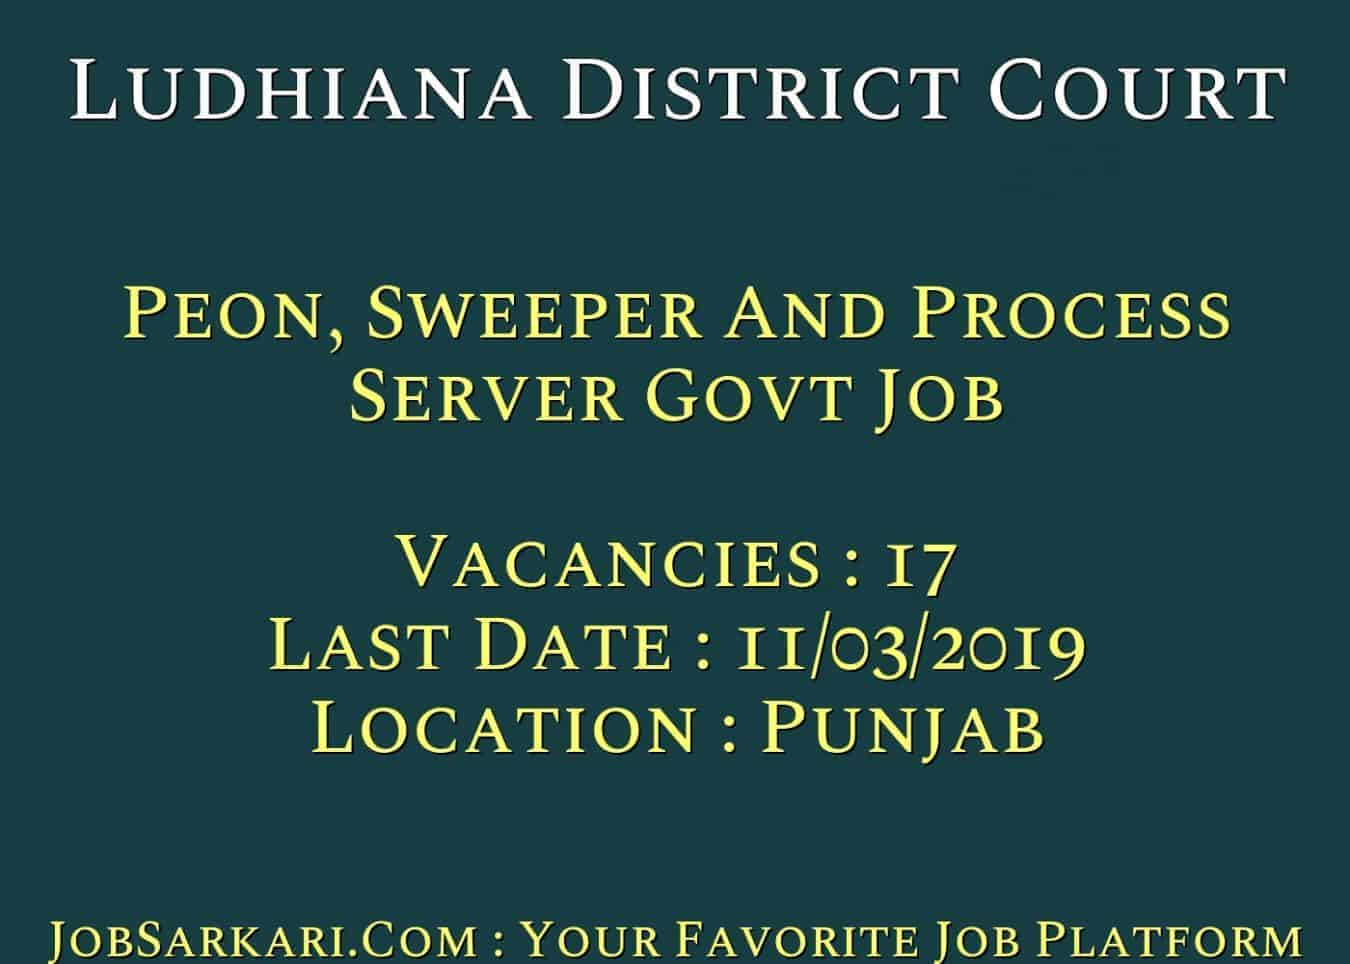 Ludhiana District Court Recruitment 2019 For Peon, Sweeper And Process Server Govt Job